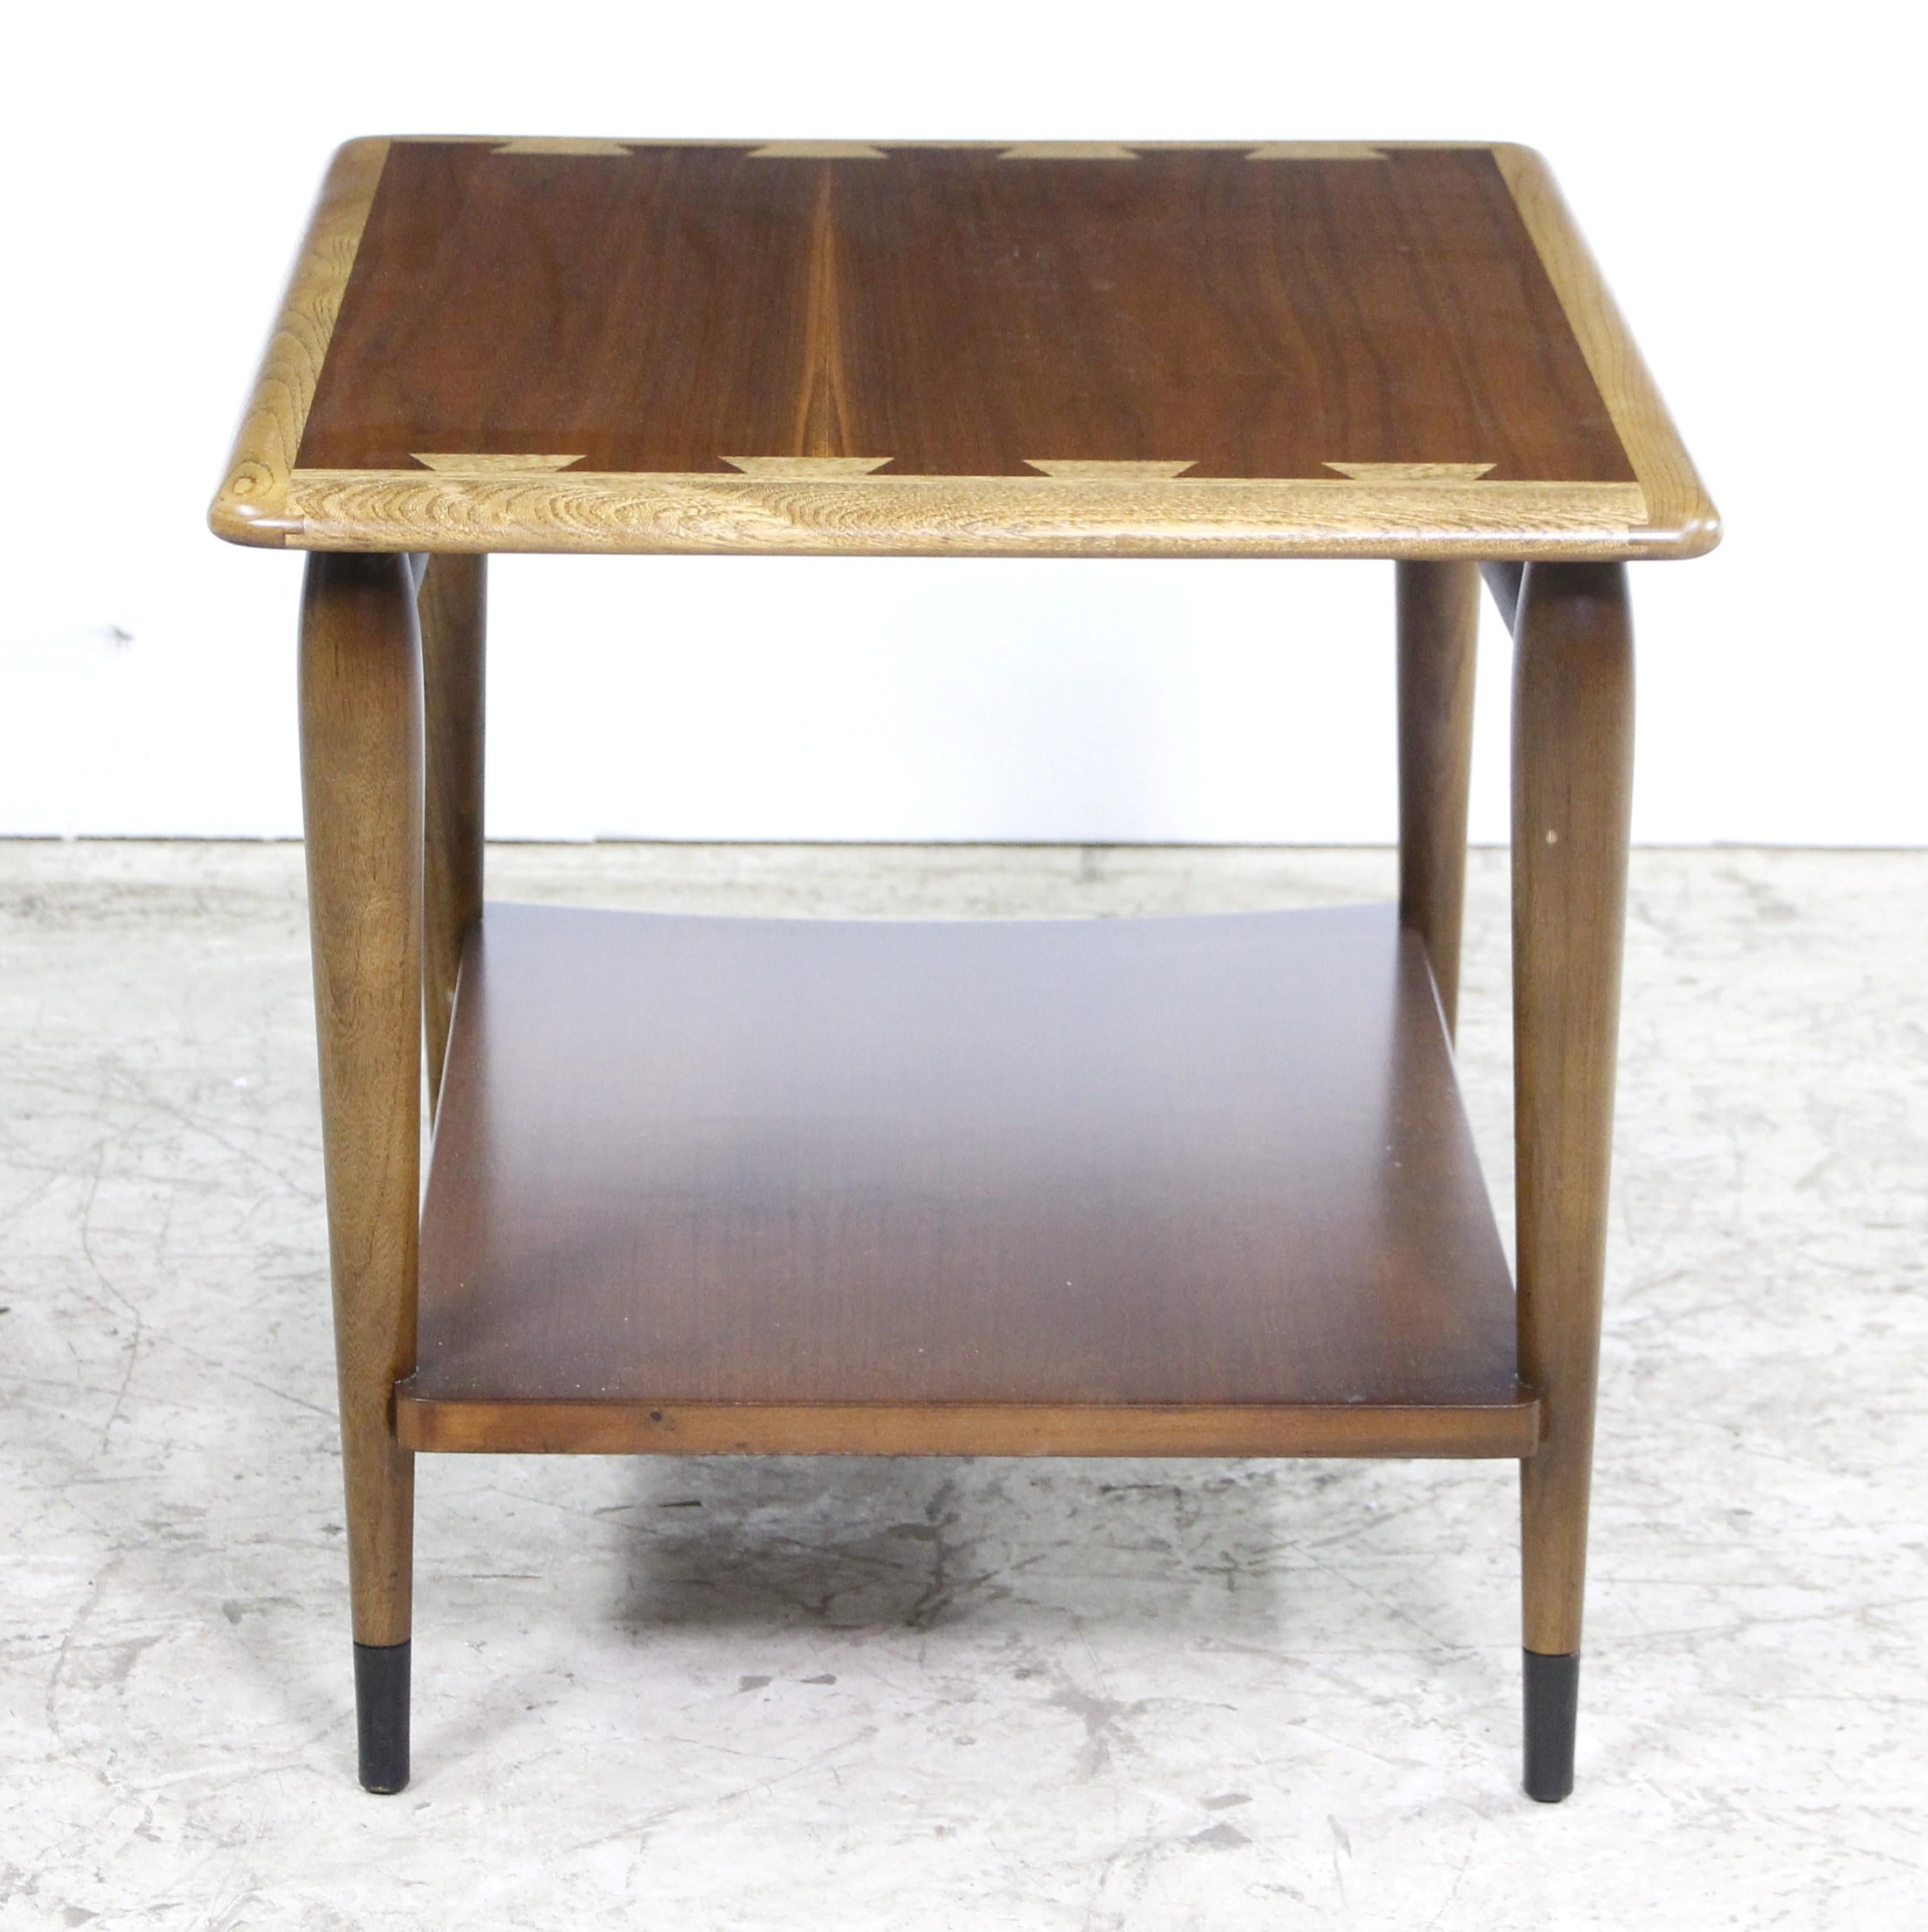 Mid-Century Modern Walnut Side Table with Shelf by Lane Furniture 1